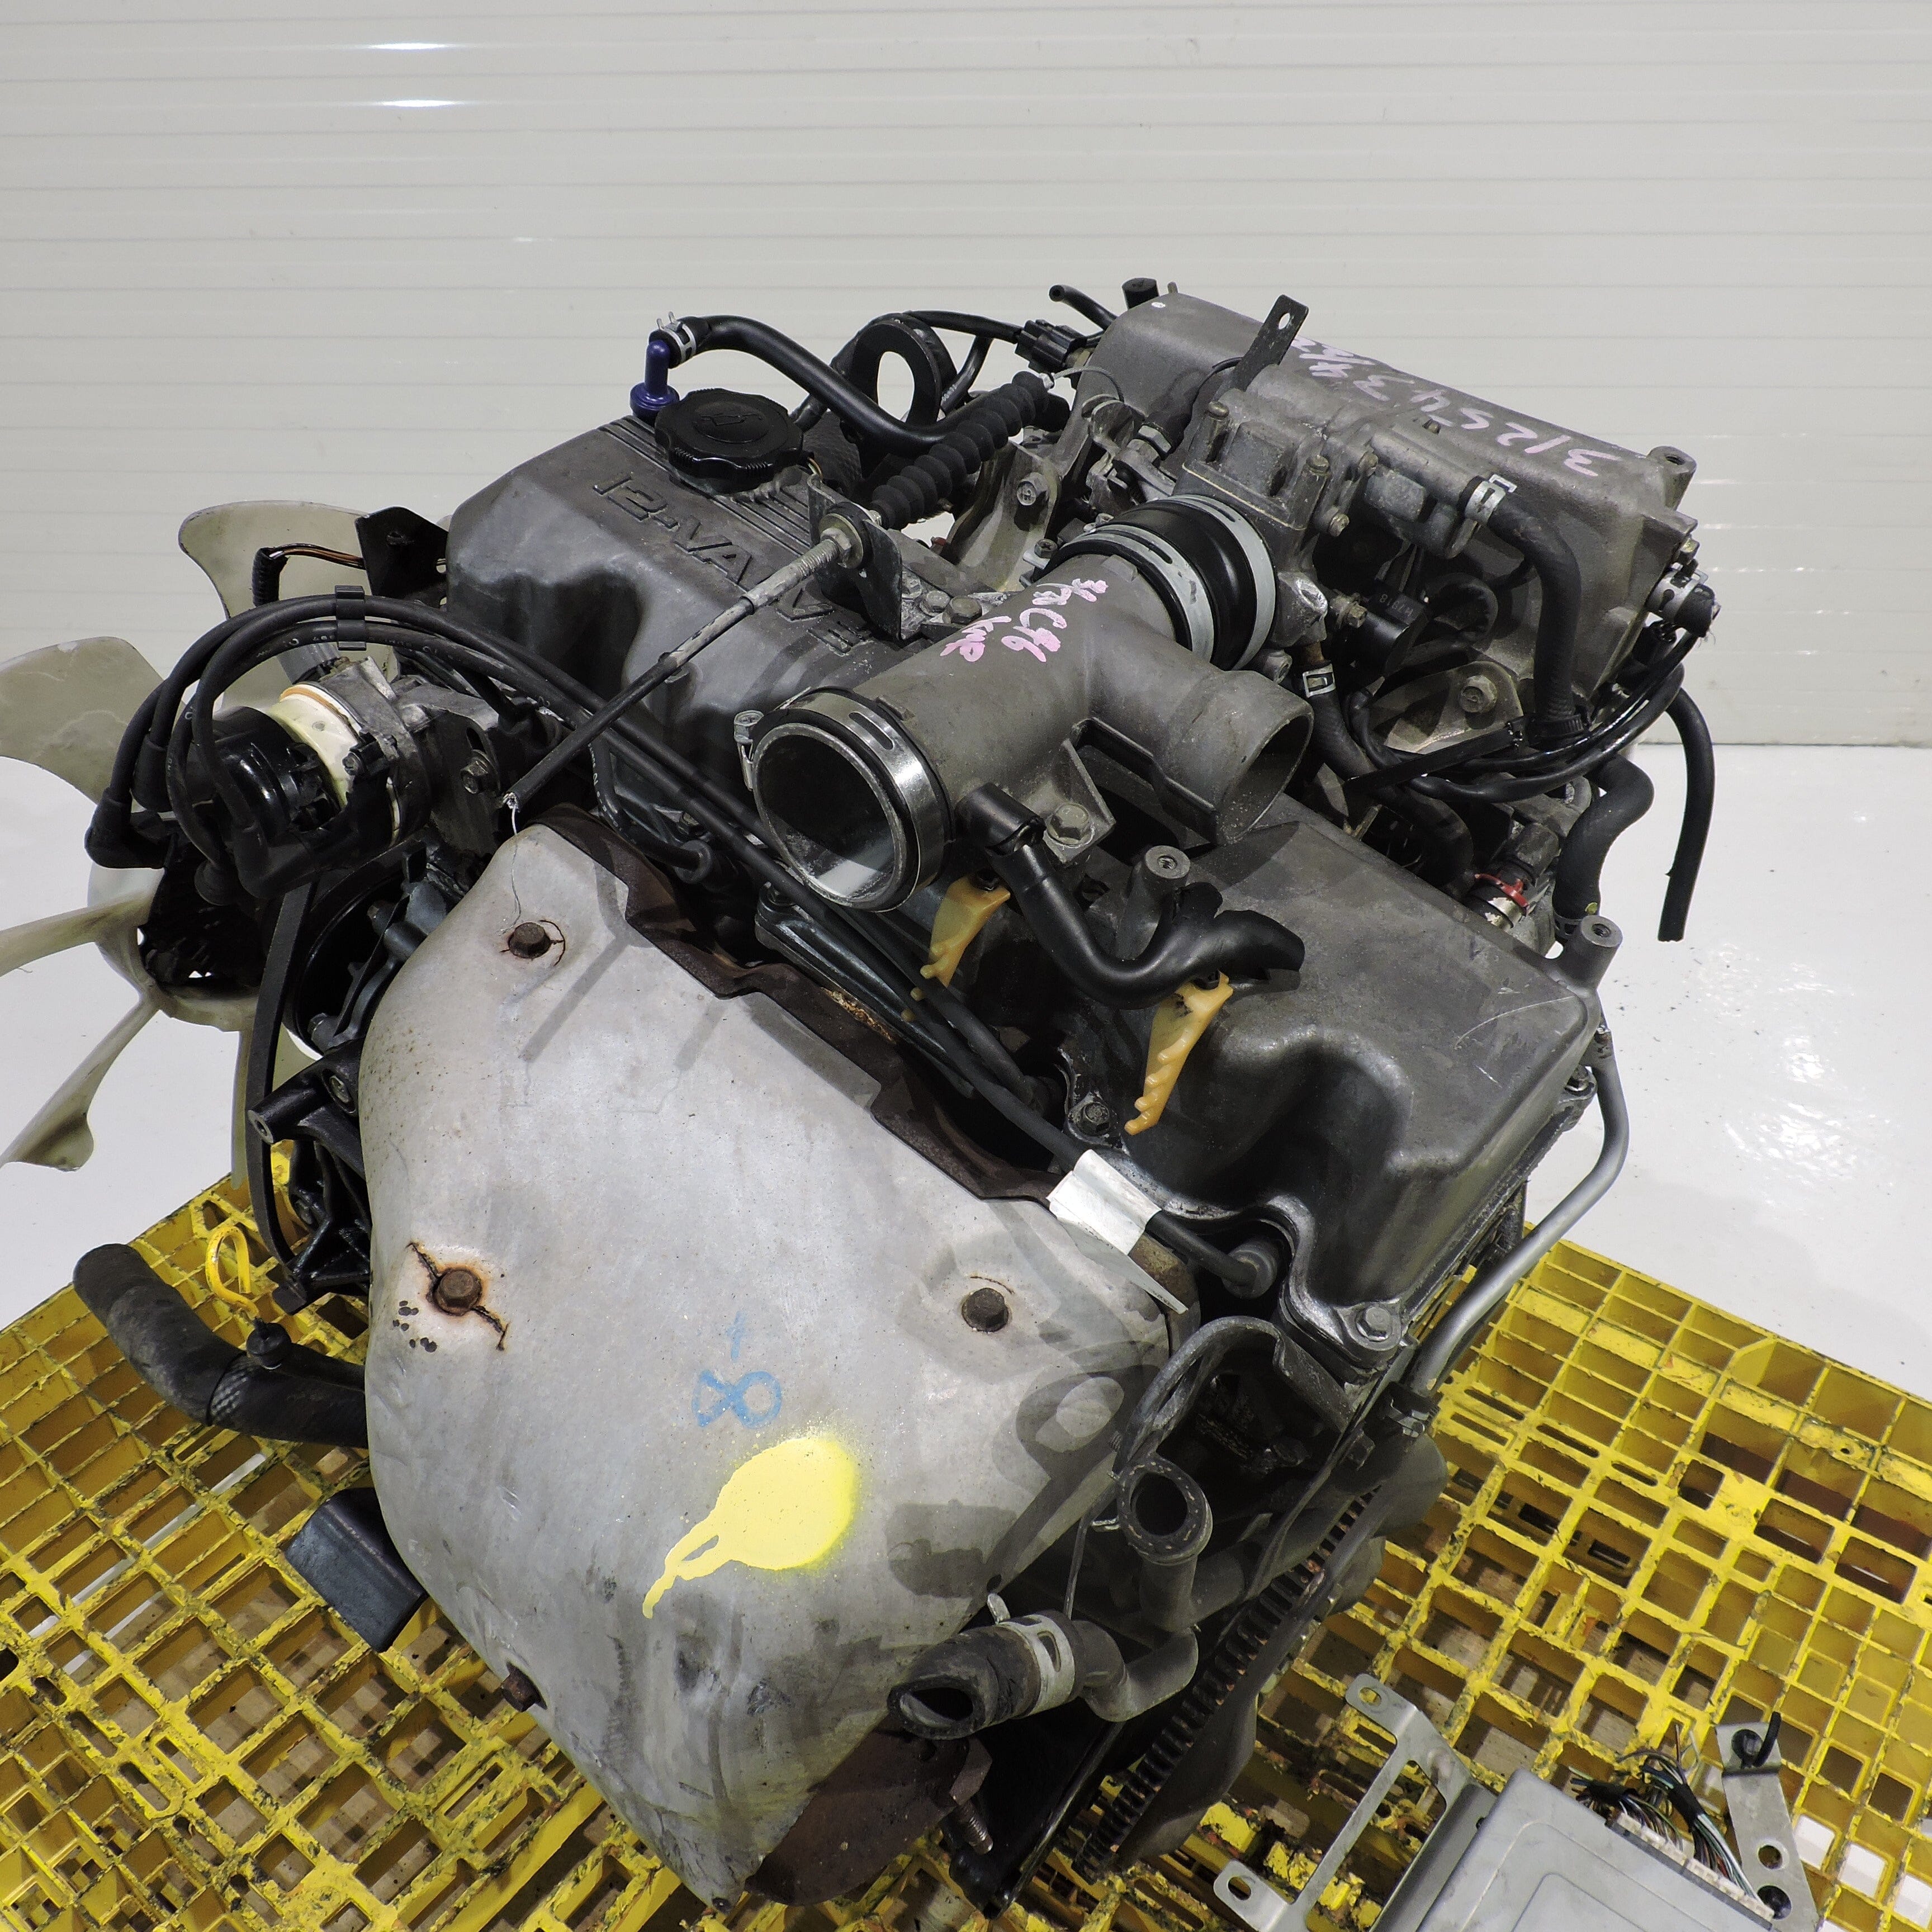 Mazda B2600 JDM Replacement For 2.6L Engine - G5